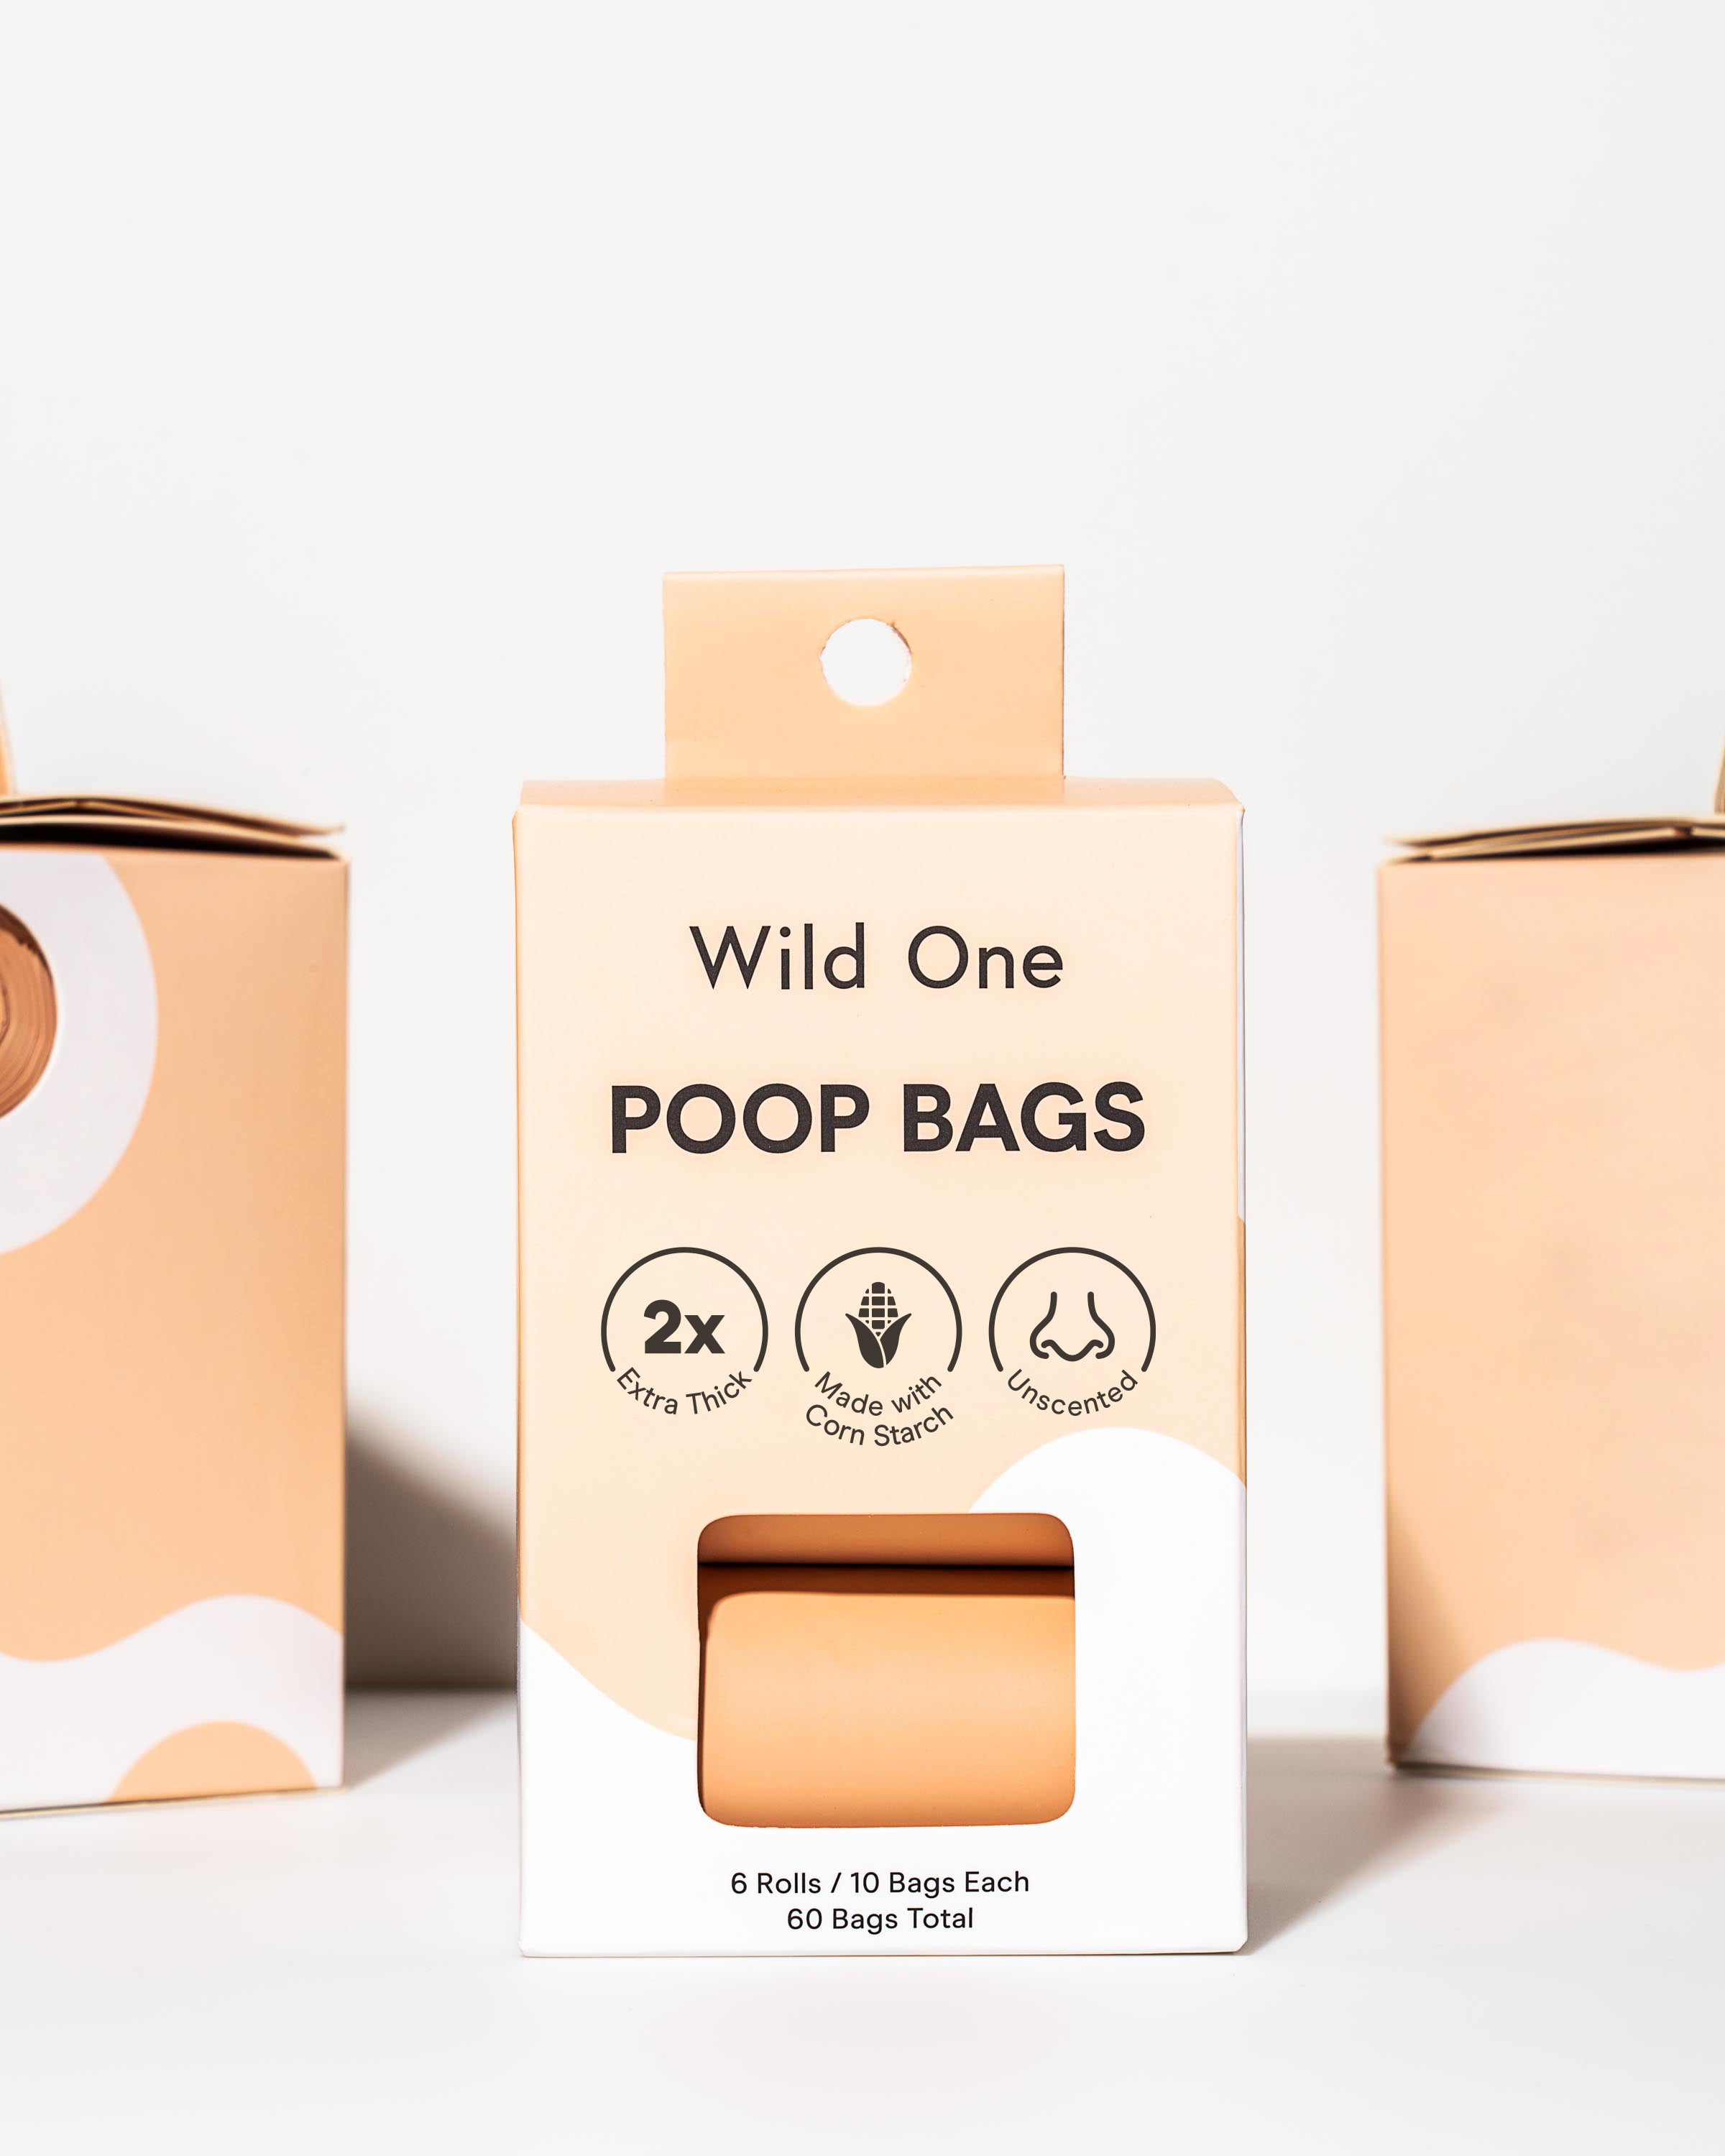 Waste Bags & Wilderness Waste Containment Pouch